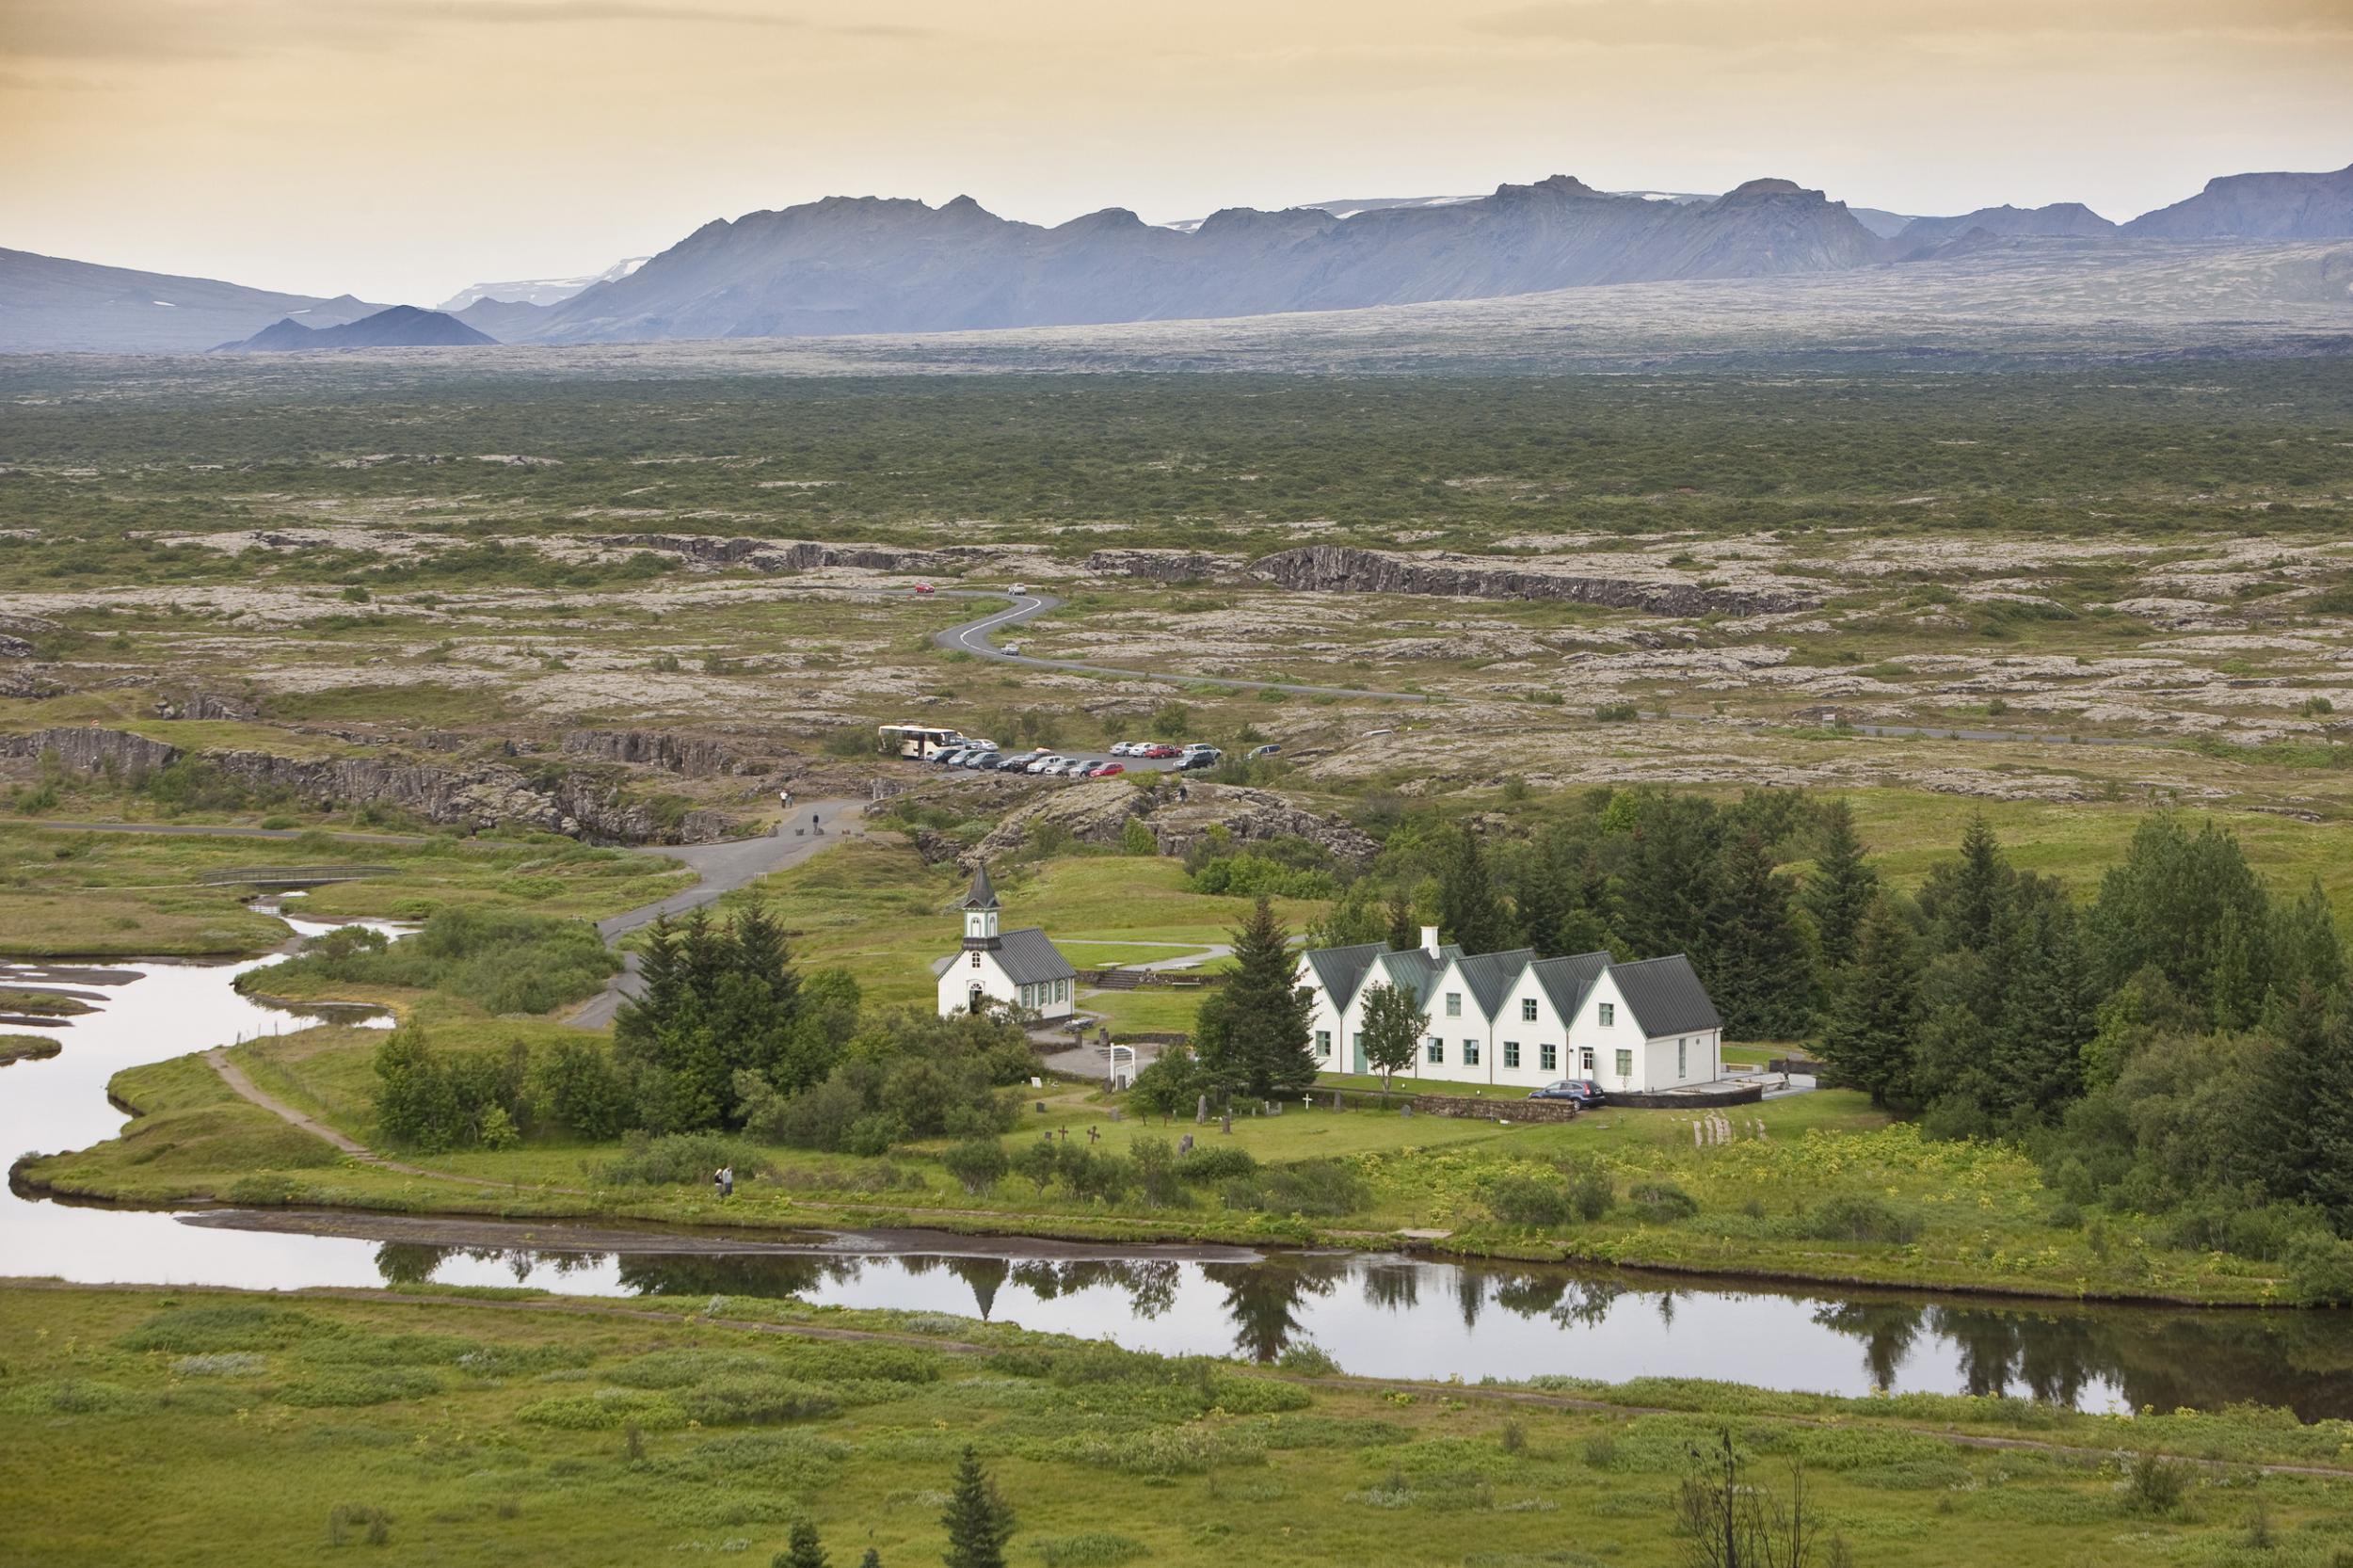 Iceland's Ring Road circles the country's most famous sights, including Thingvellir, where the North American and Eurasian tectonic plates meet